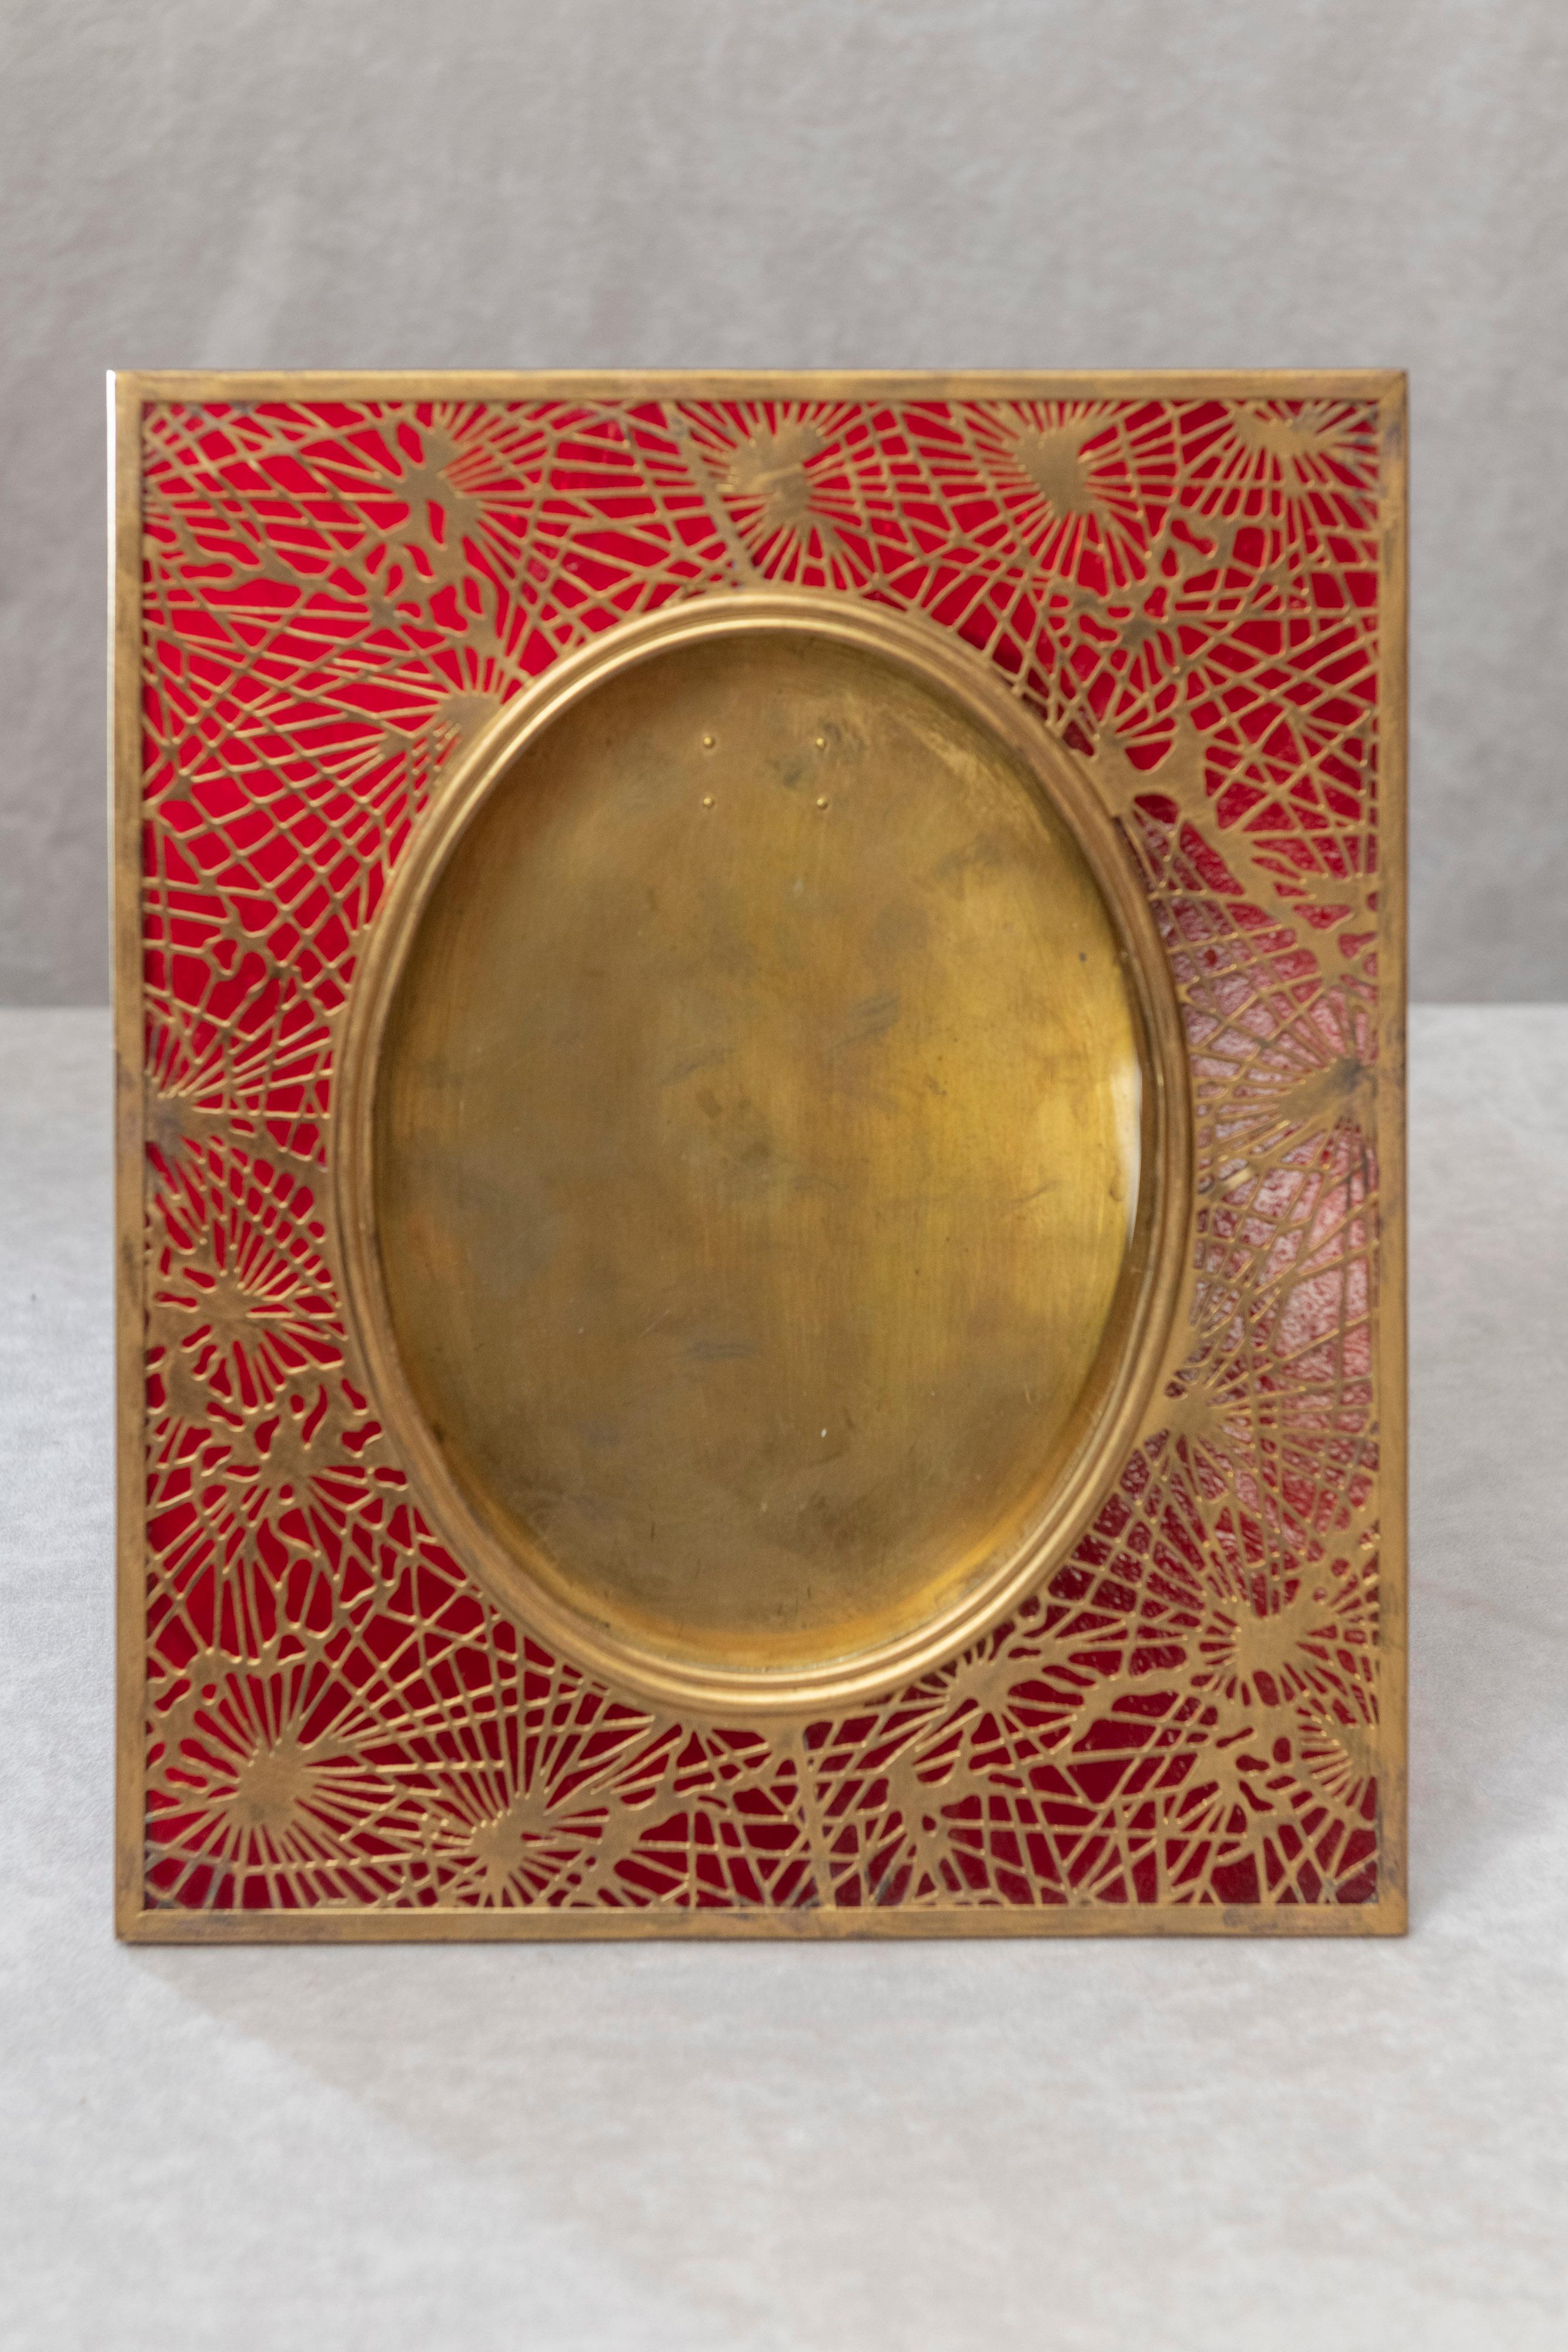 This beautiful original Tiffany Studios picture frame has ruby red glass and gilt metal, all done in their popular pine needle pattern. Normally the glass is green or amber. This one is rather exotic and has a rich look with the red background glass